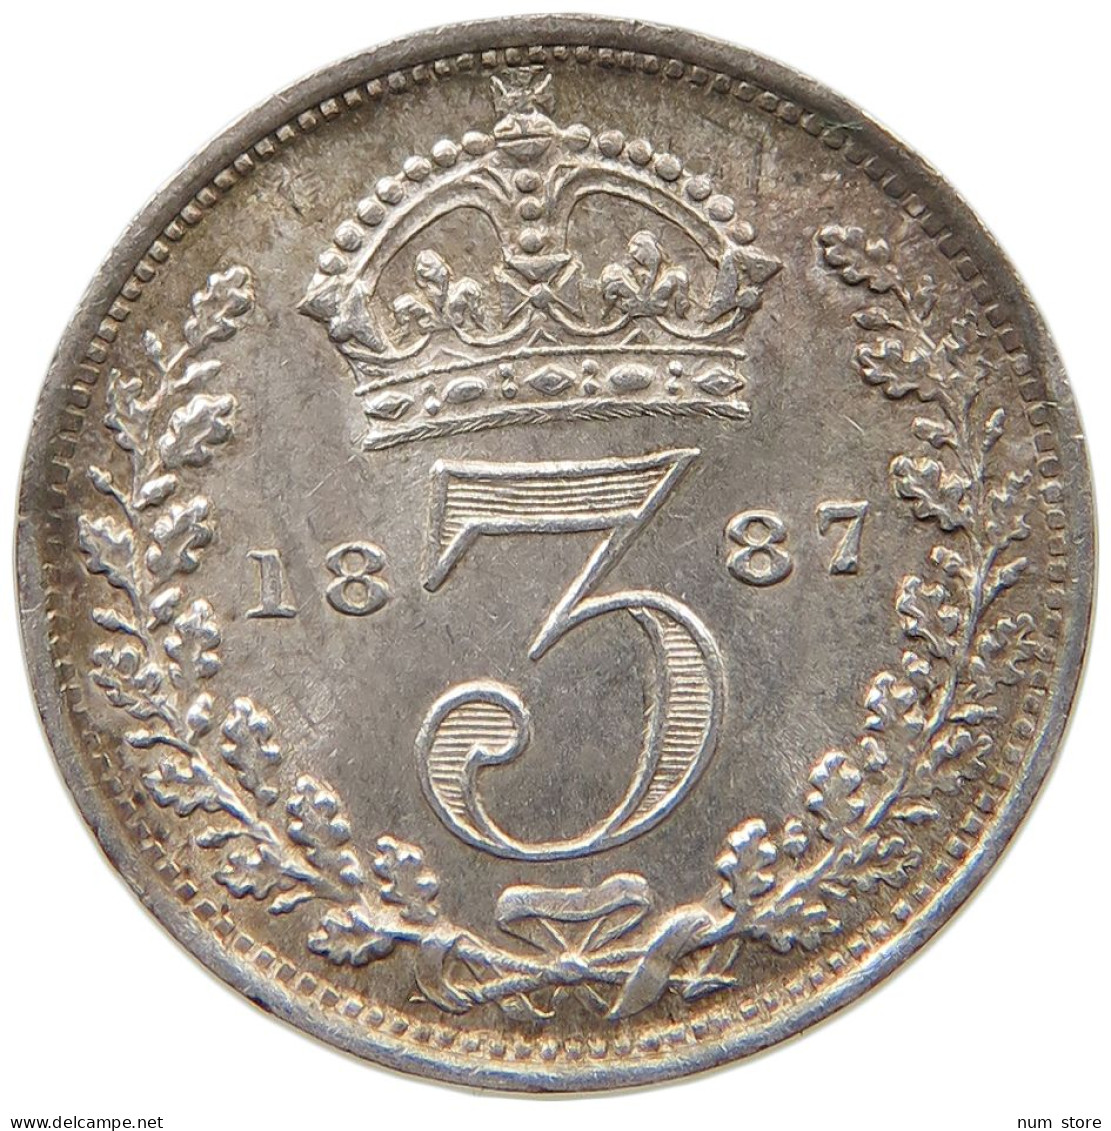 GREAT BRITAIN THREEPENCE 1887 Victoria 1837-1901 #t139 0237 - F. 3 Pence